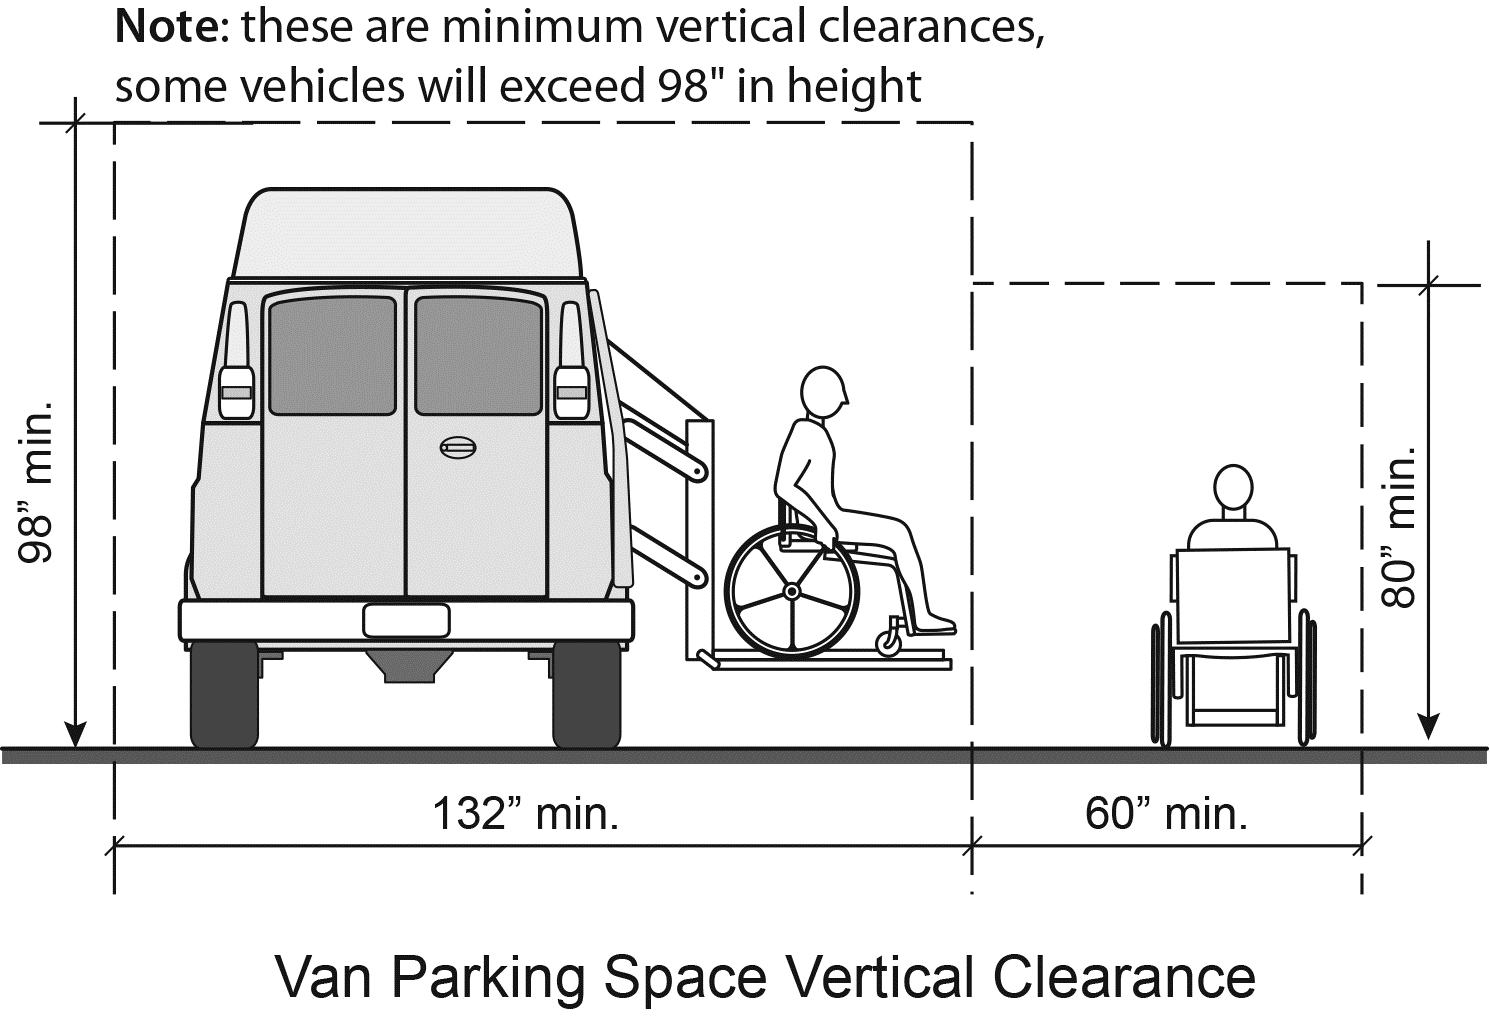 Figure 6: Minimum width required for van parking spaces in parking garages is 132 inches to allow space for van lifts and ramps.